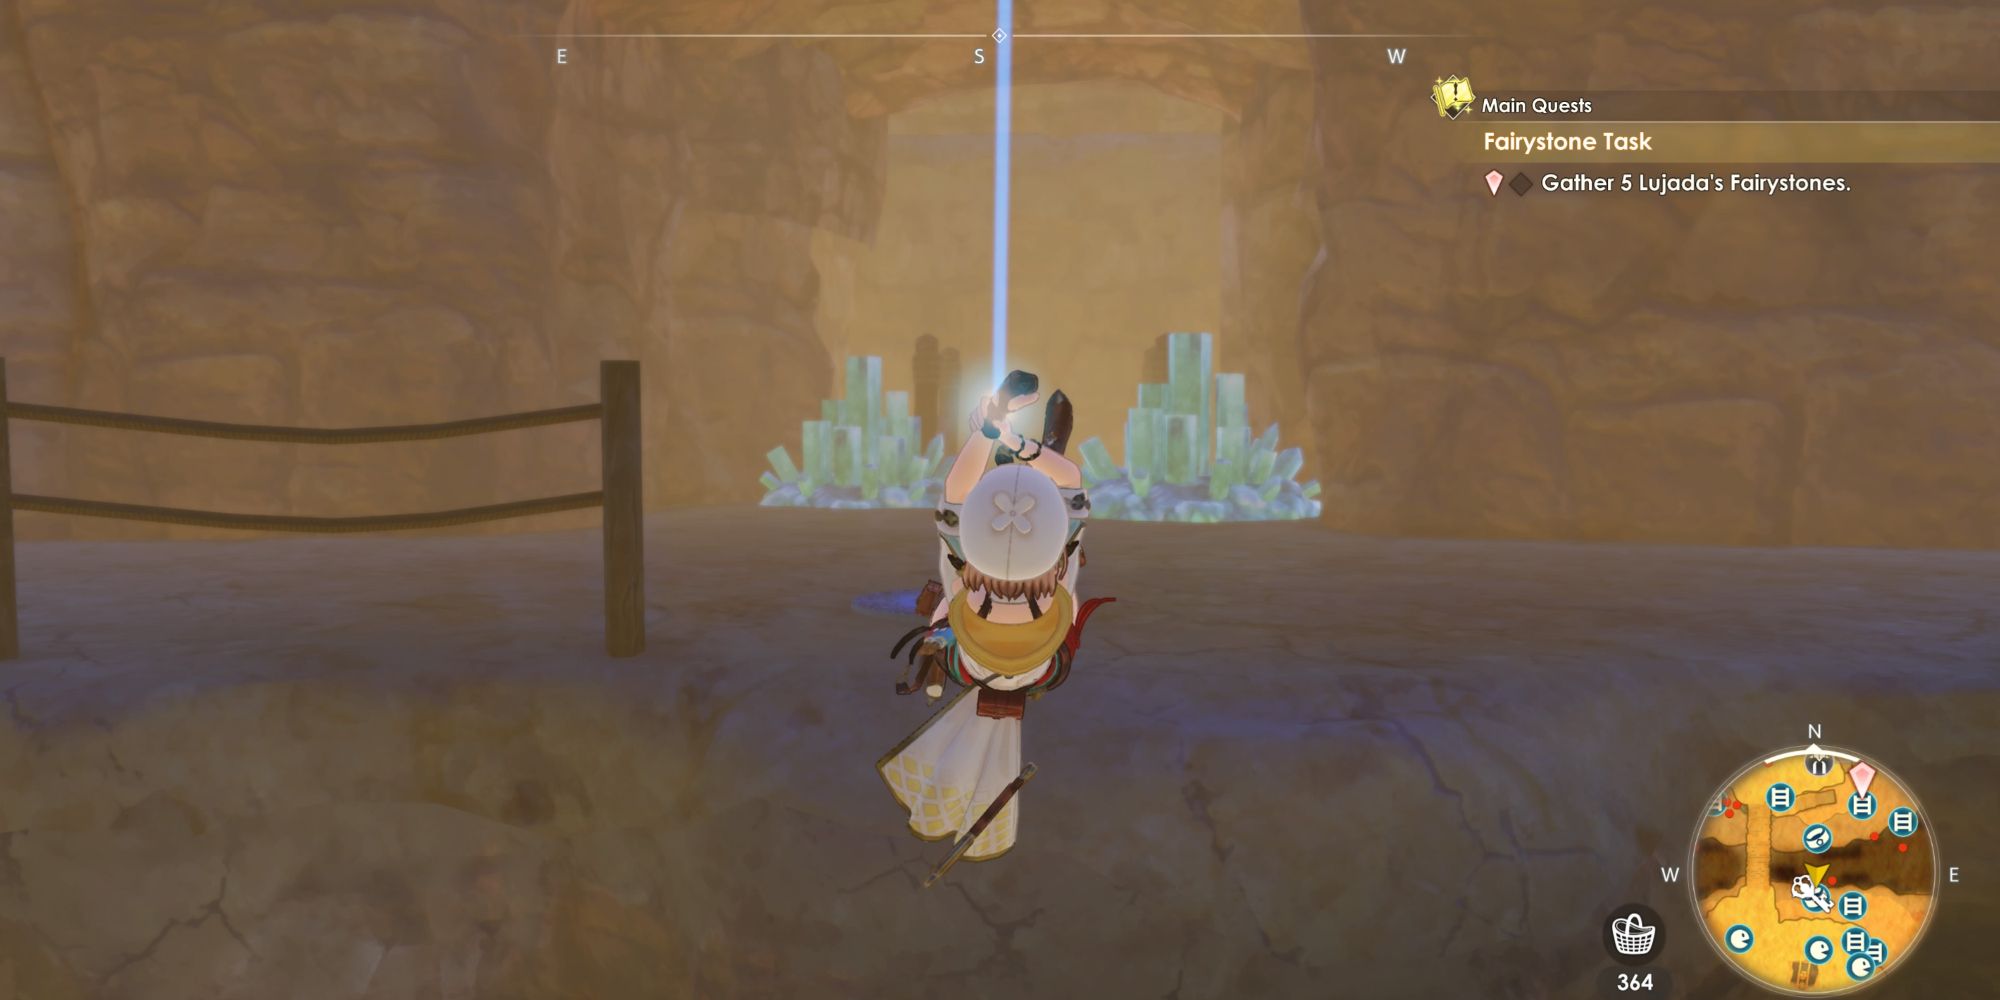 Ryza using her Emerald Band to swing over a gap with a rope in Atelier Ryza 3: Alchemist Of The End & The Secret Key